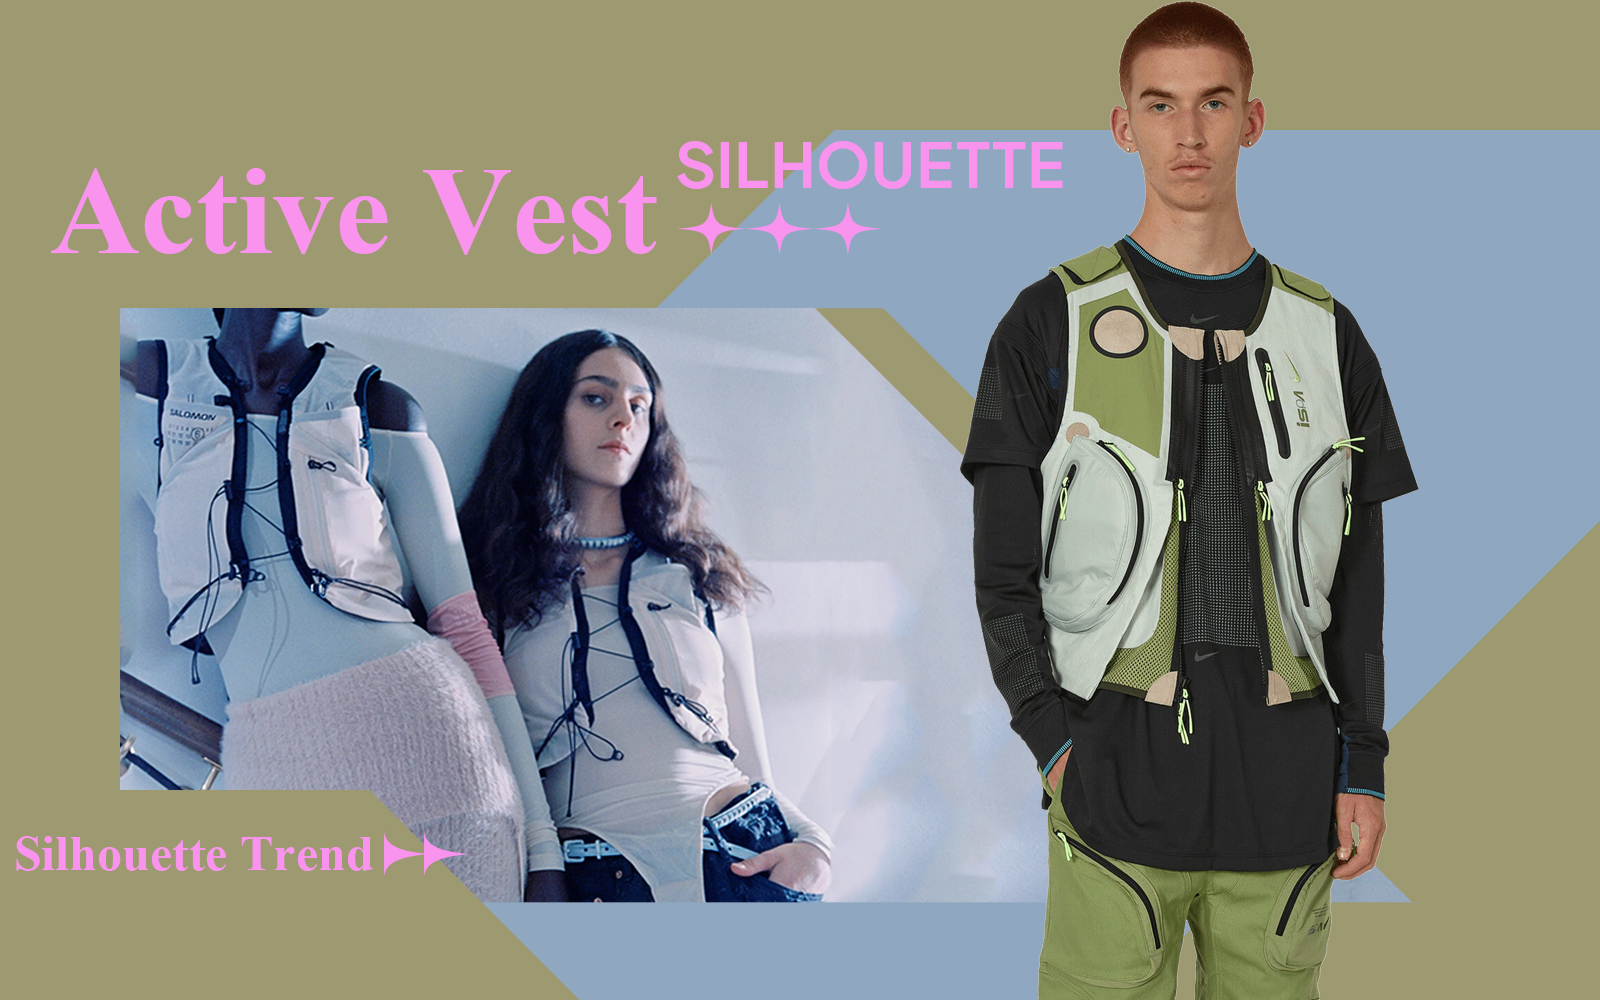 Mix and Match -- The Silhouette Trend for Active Vest